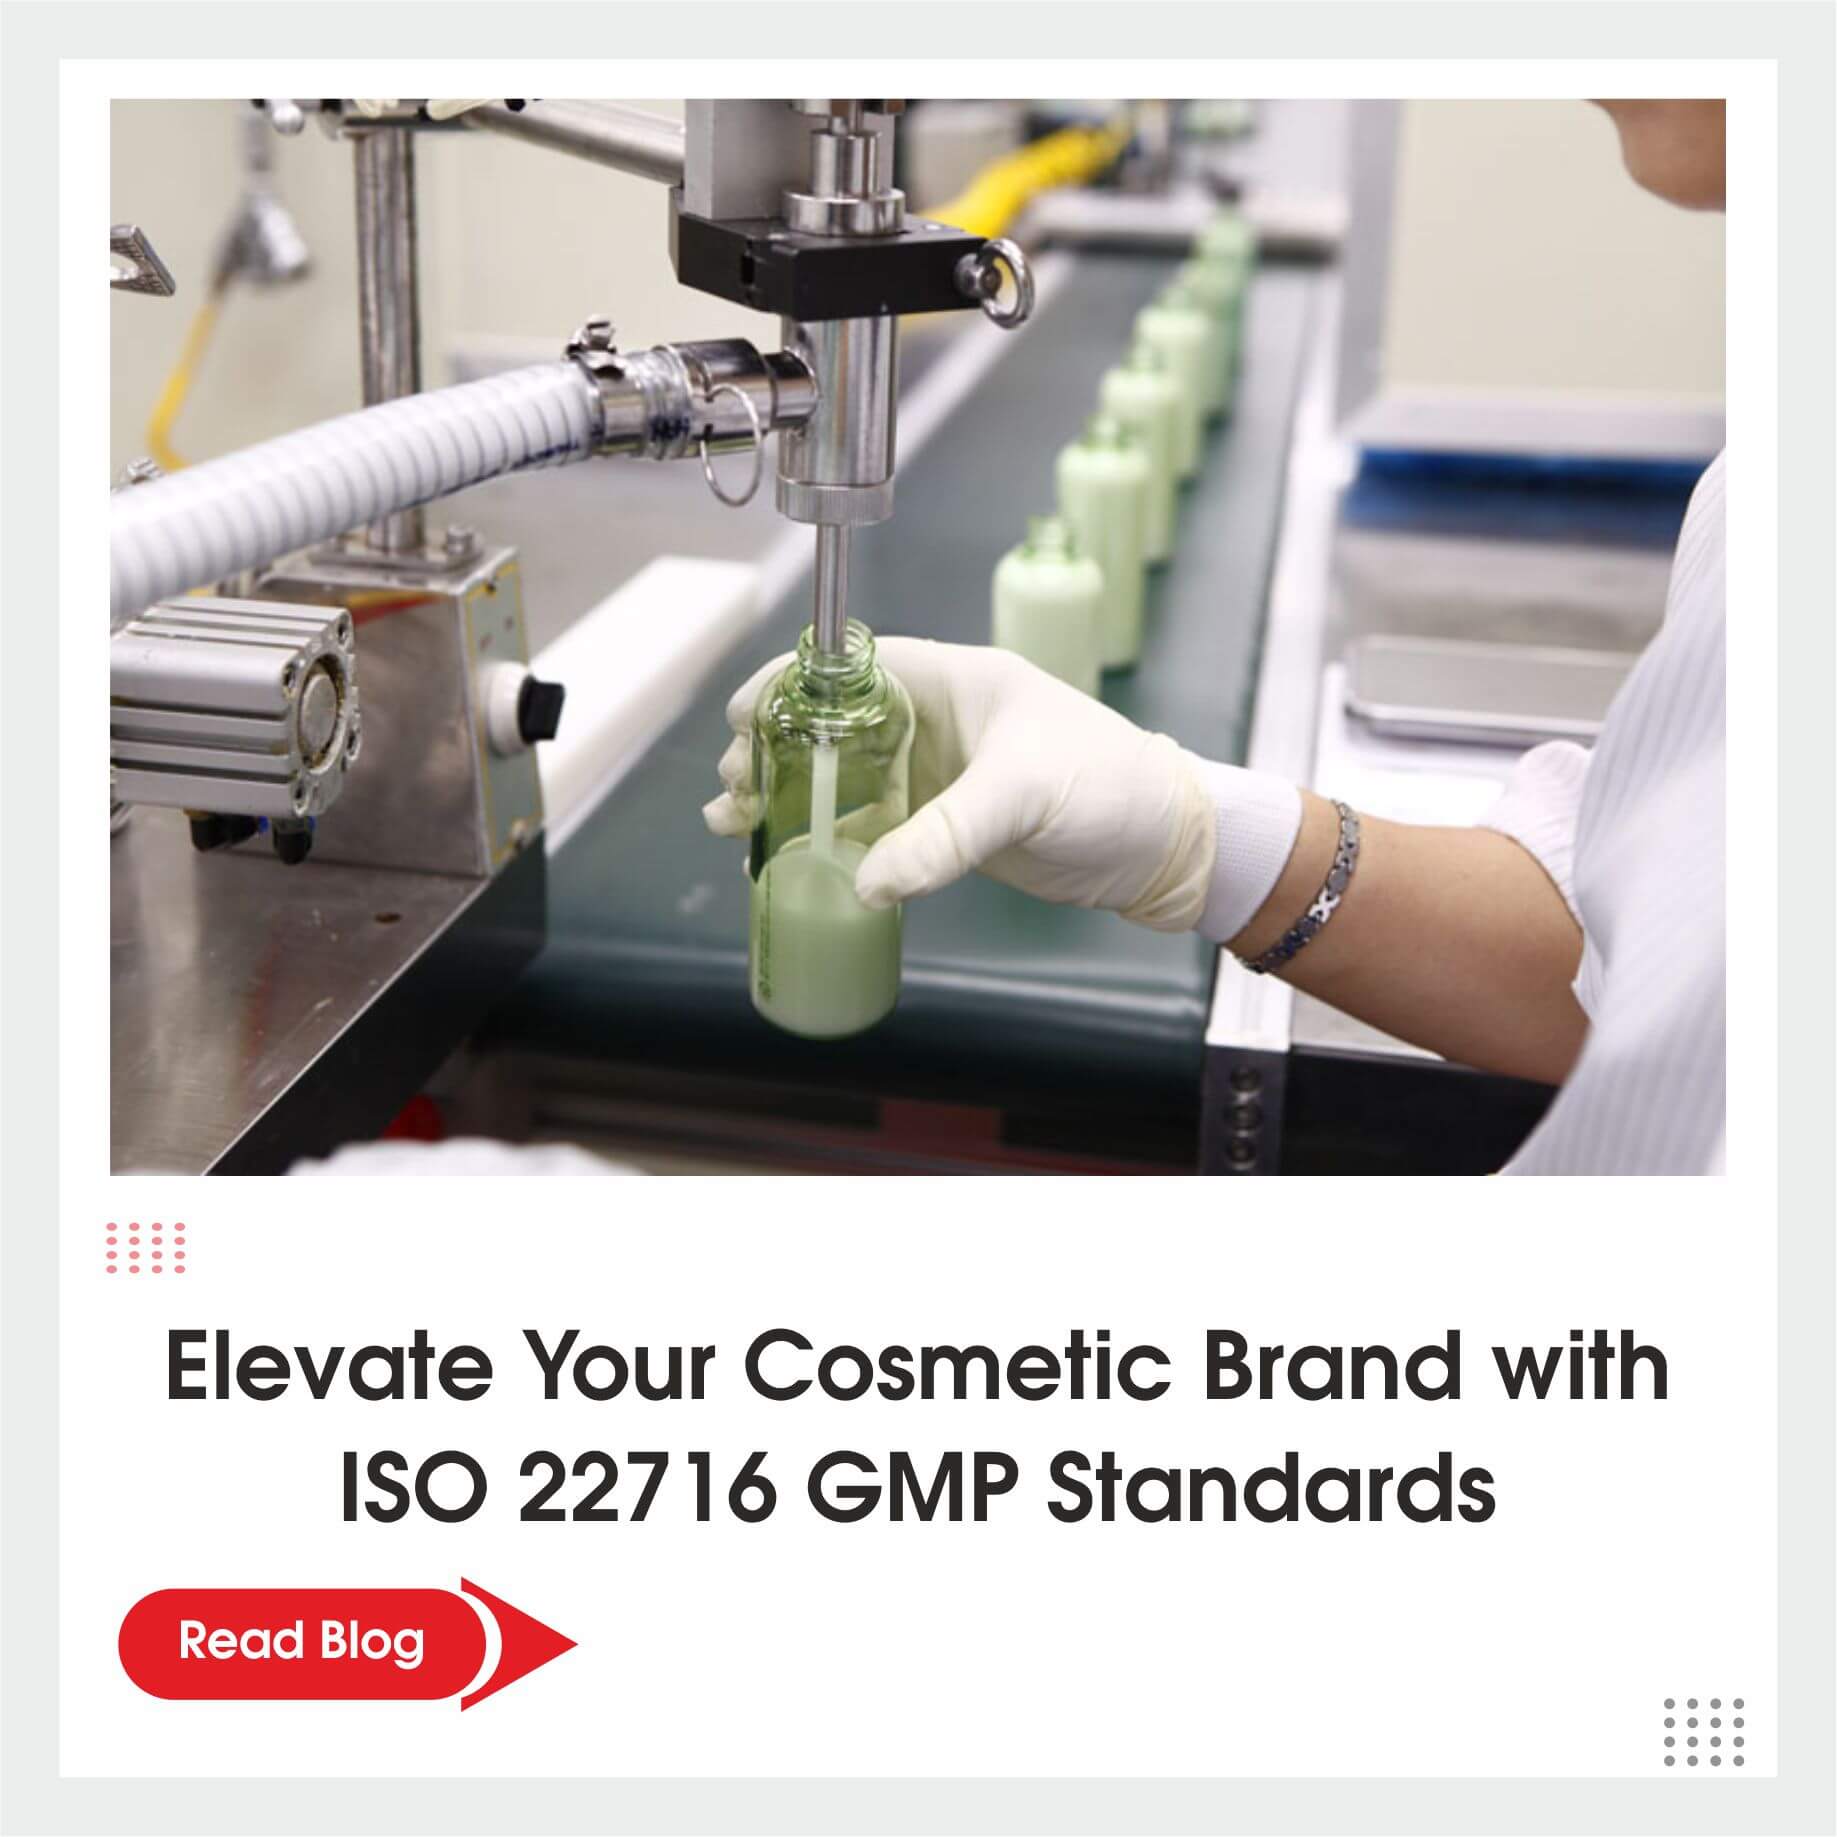 Elevate Your Cosmetic Brand with ISO 22716 GMP Standards